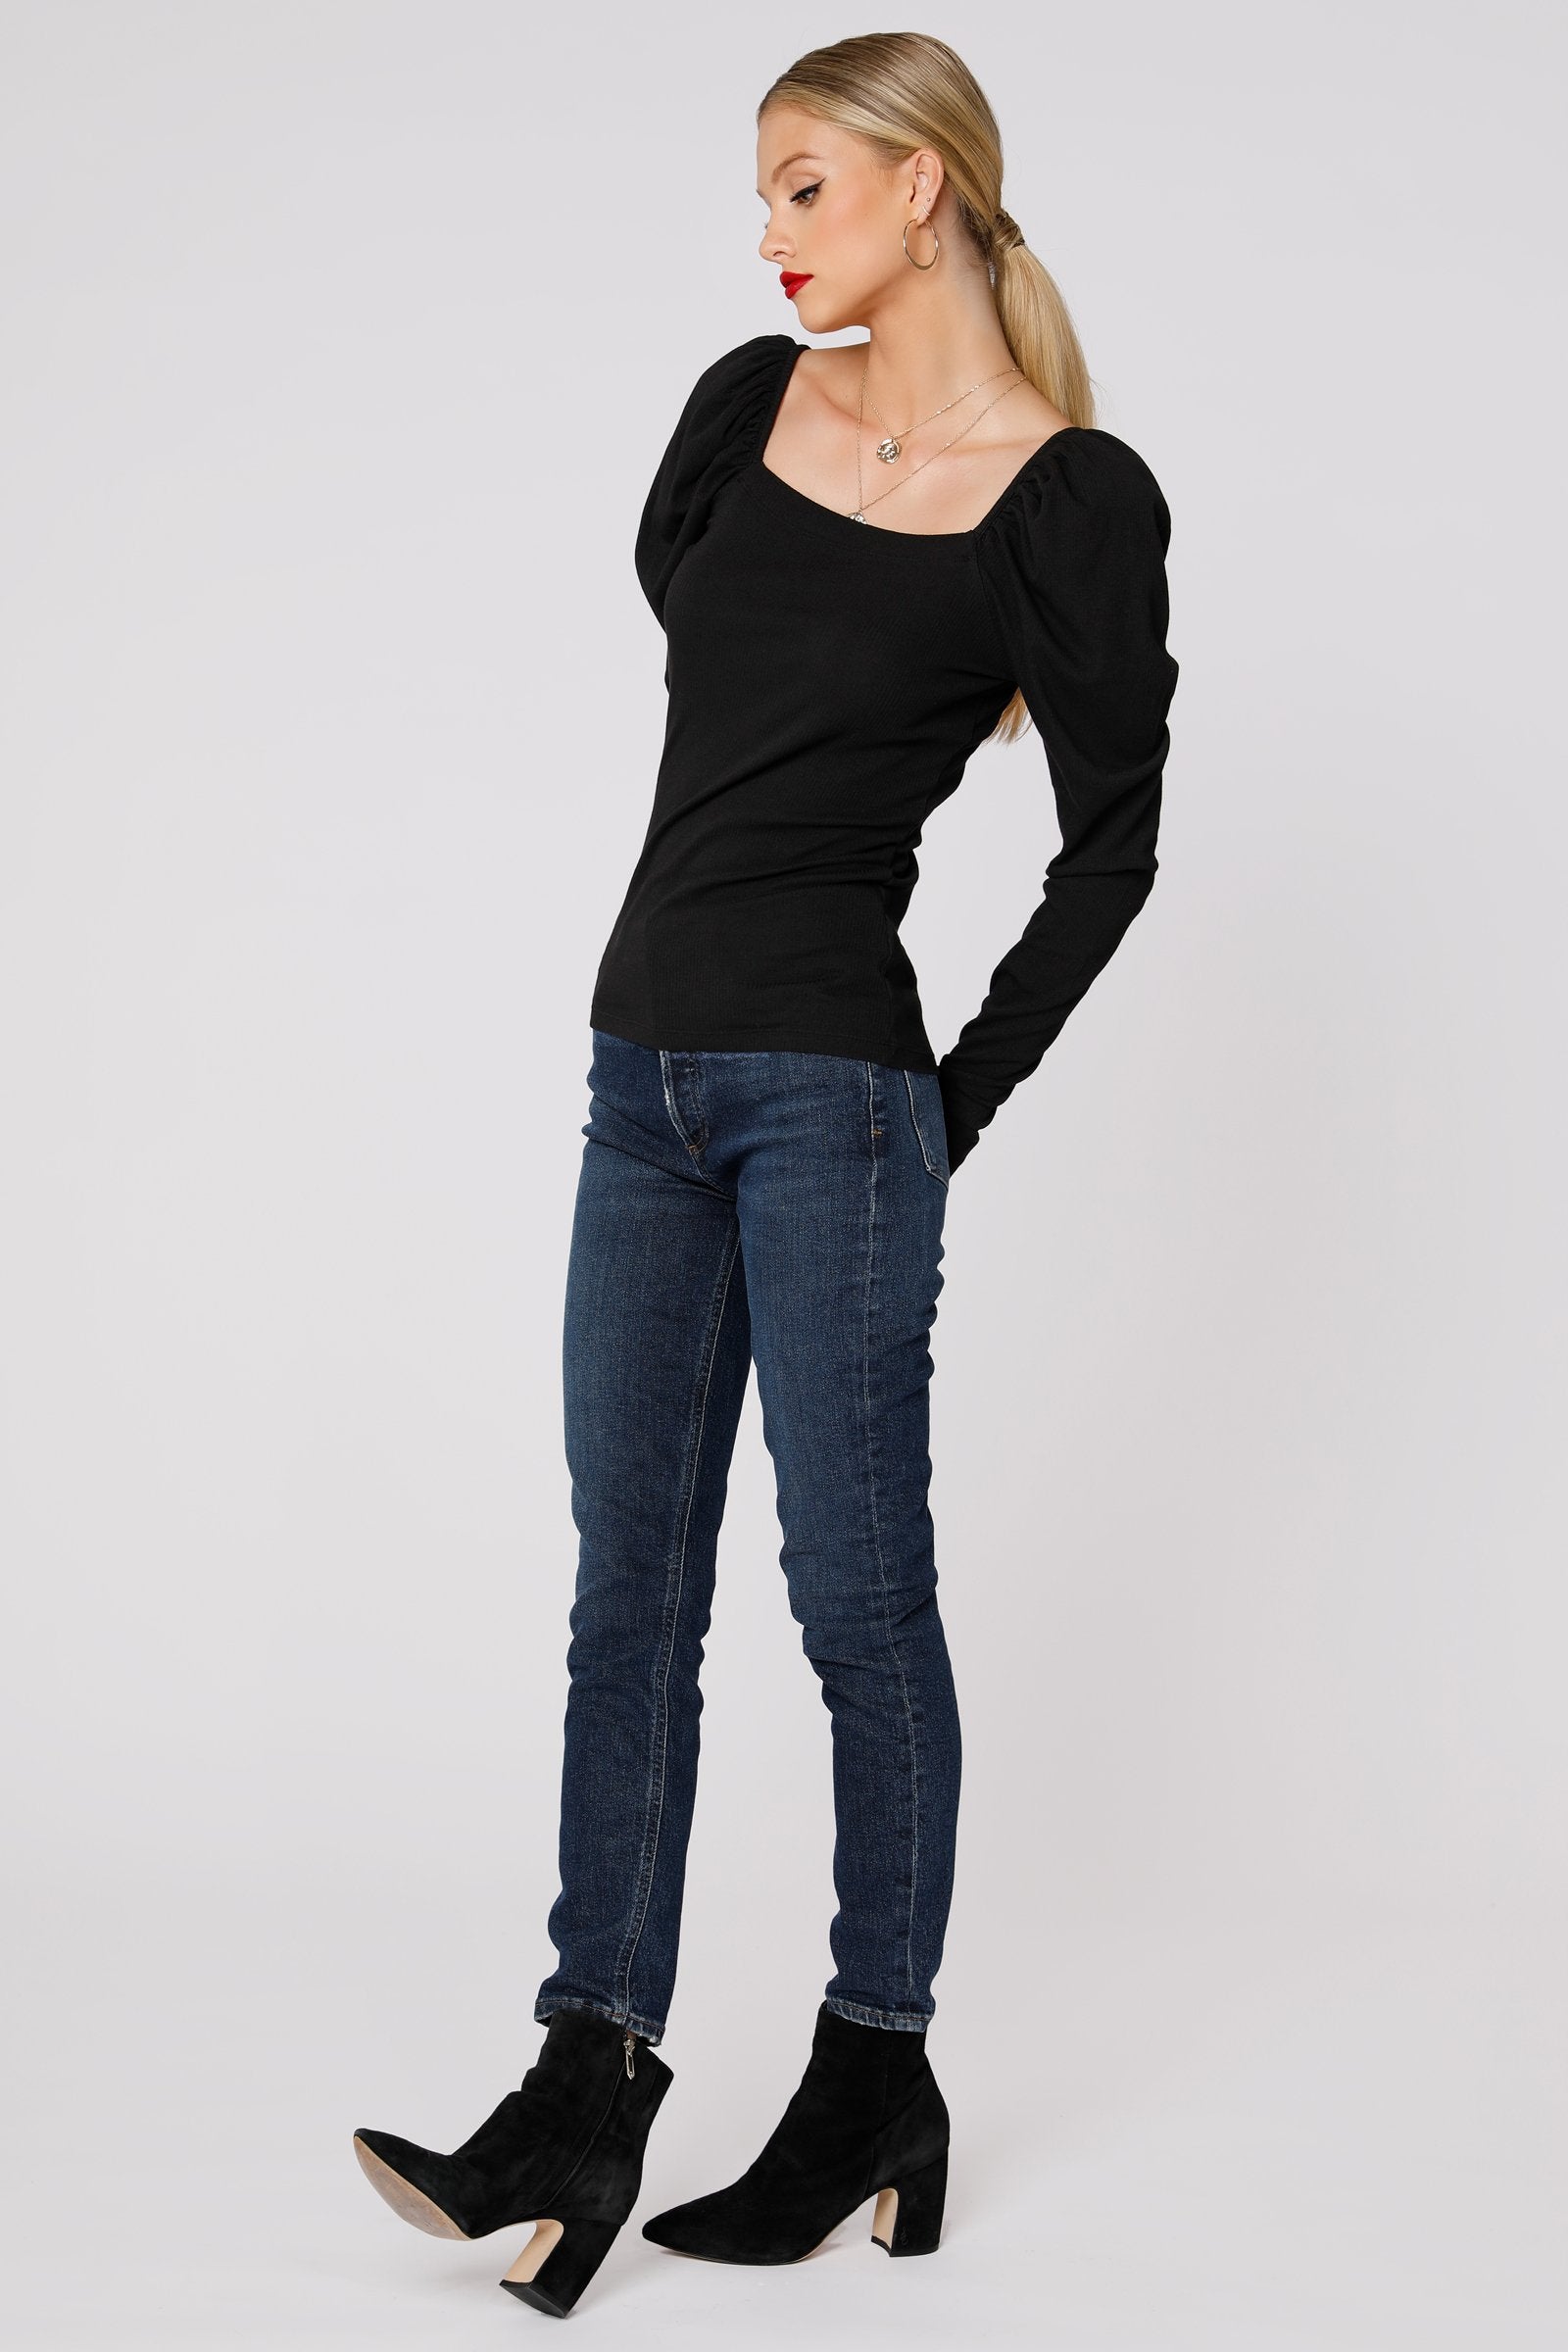 Black Square Neck Shirred Sleeve Top